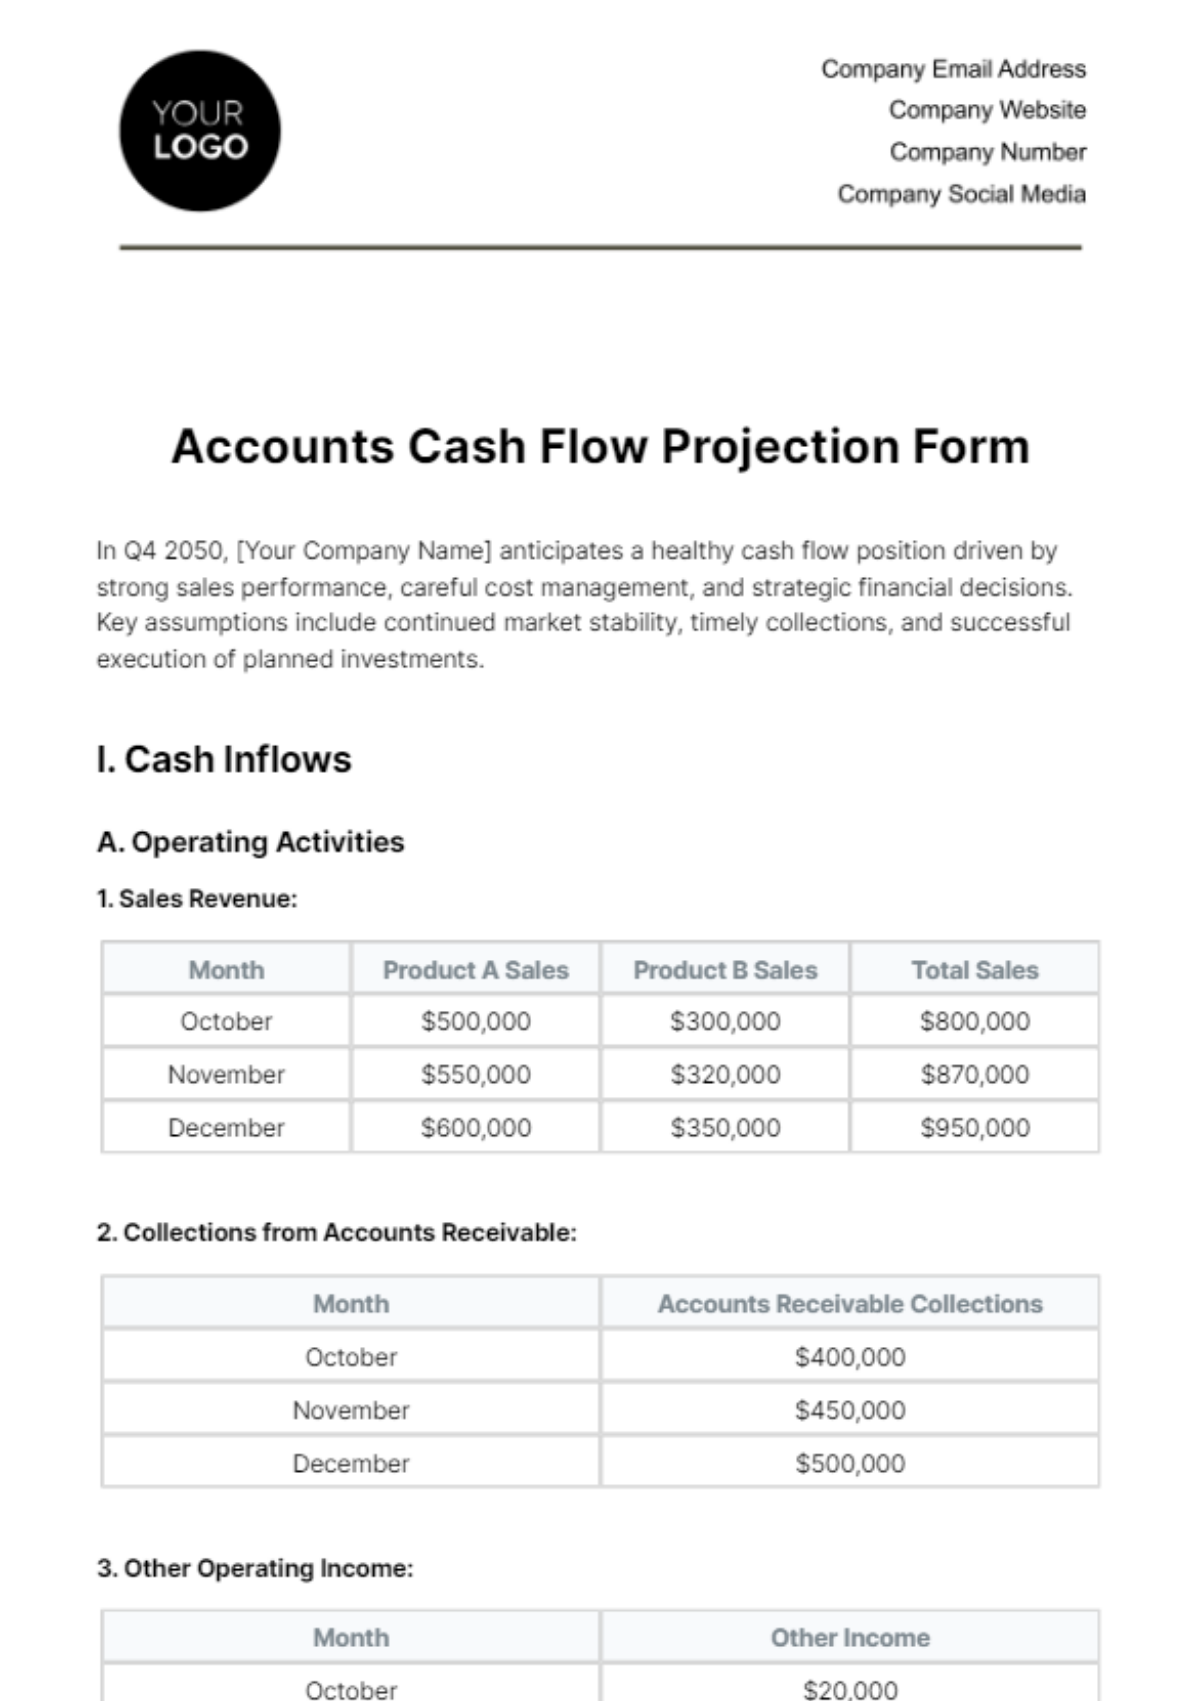 Free Accounts Cash Flow Projection Form Template